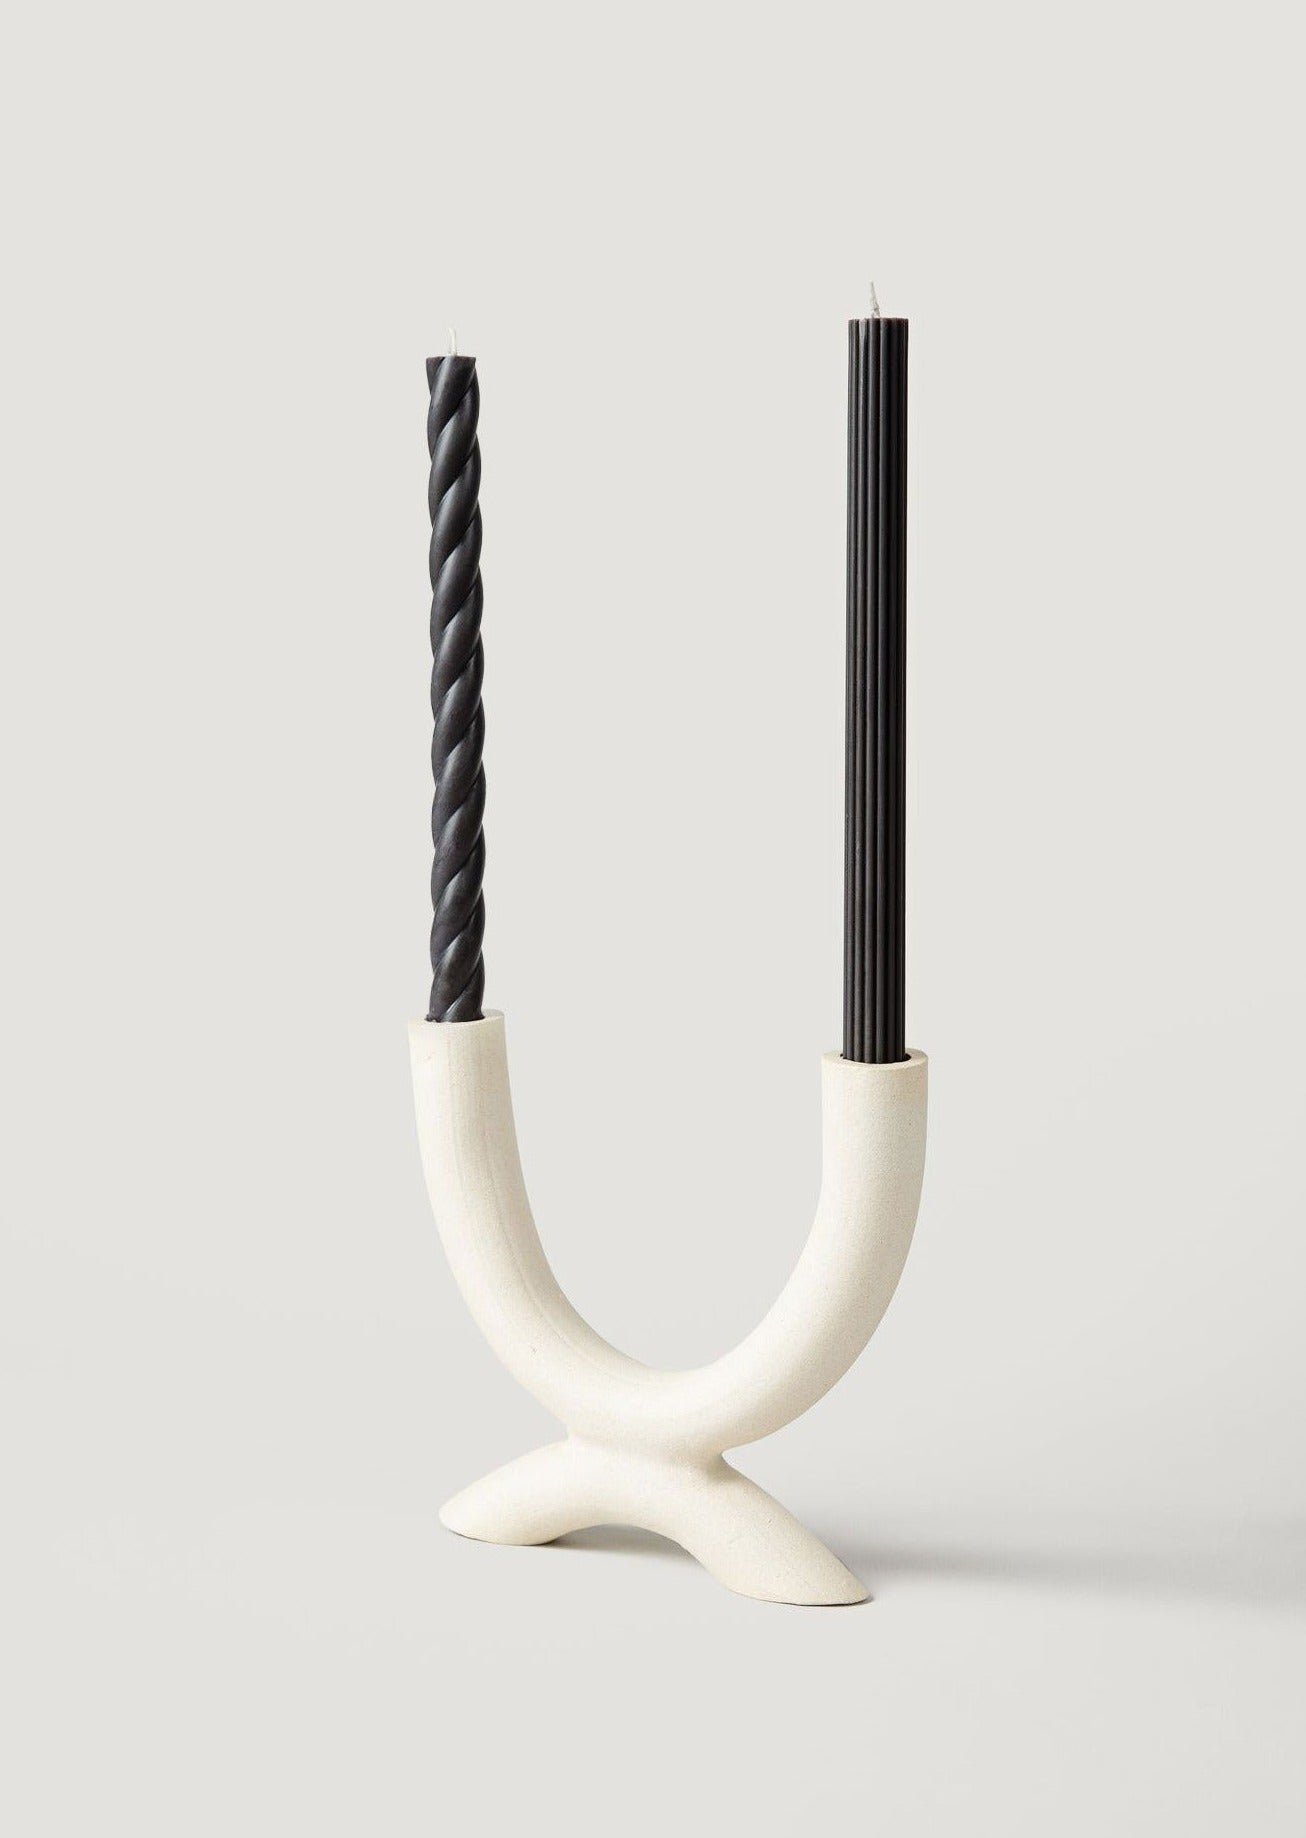 Black Taper Candles in Ceramic Candle Holder